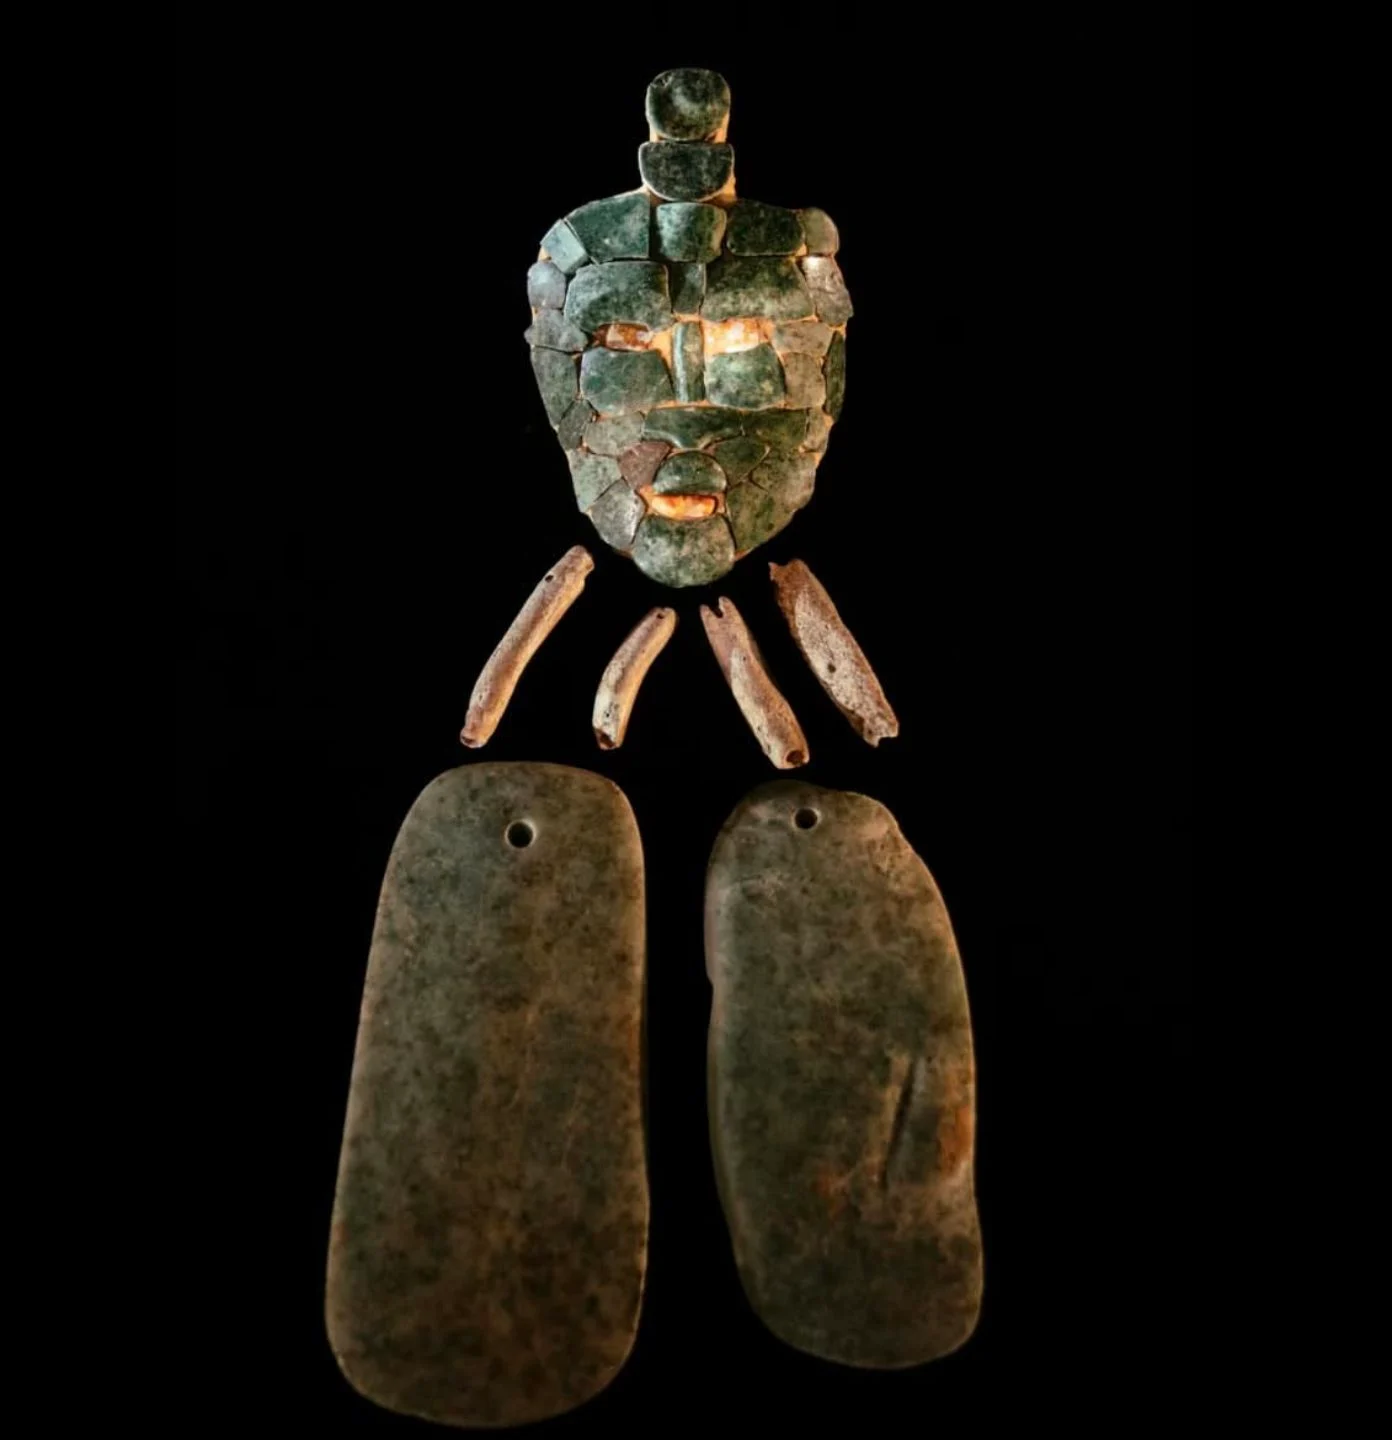 Undisturbed tomb of an unknown Maya king with jade mask discovered in Guatemala 5